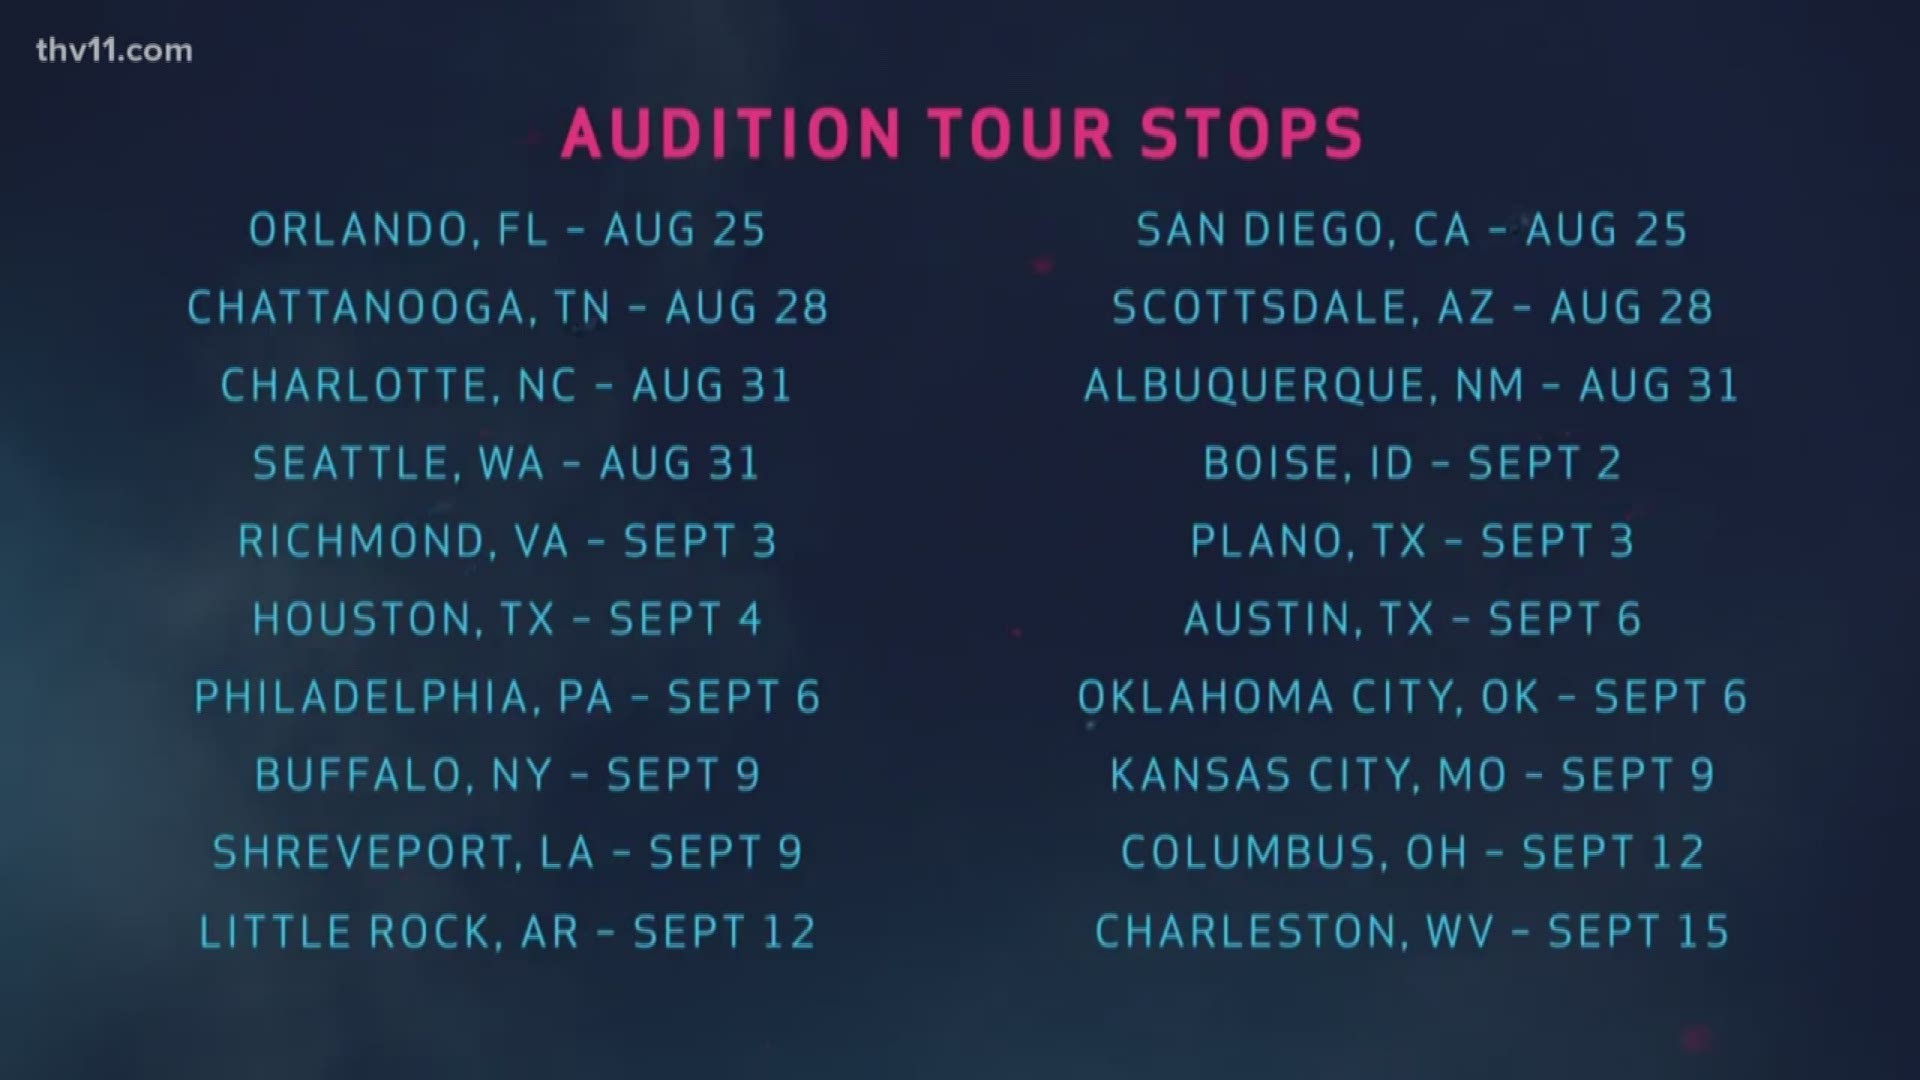 GET YOUR VOICE LESSONS IN FOLKS AMERICAN IDOL IS COMING TO LITTLE ROCK.